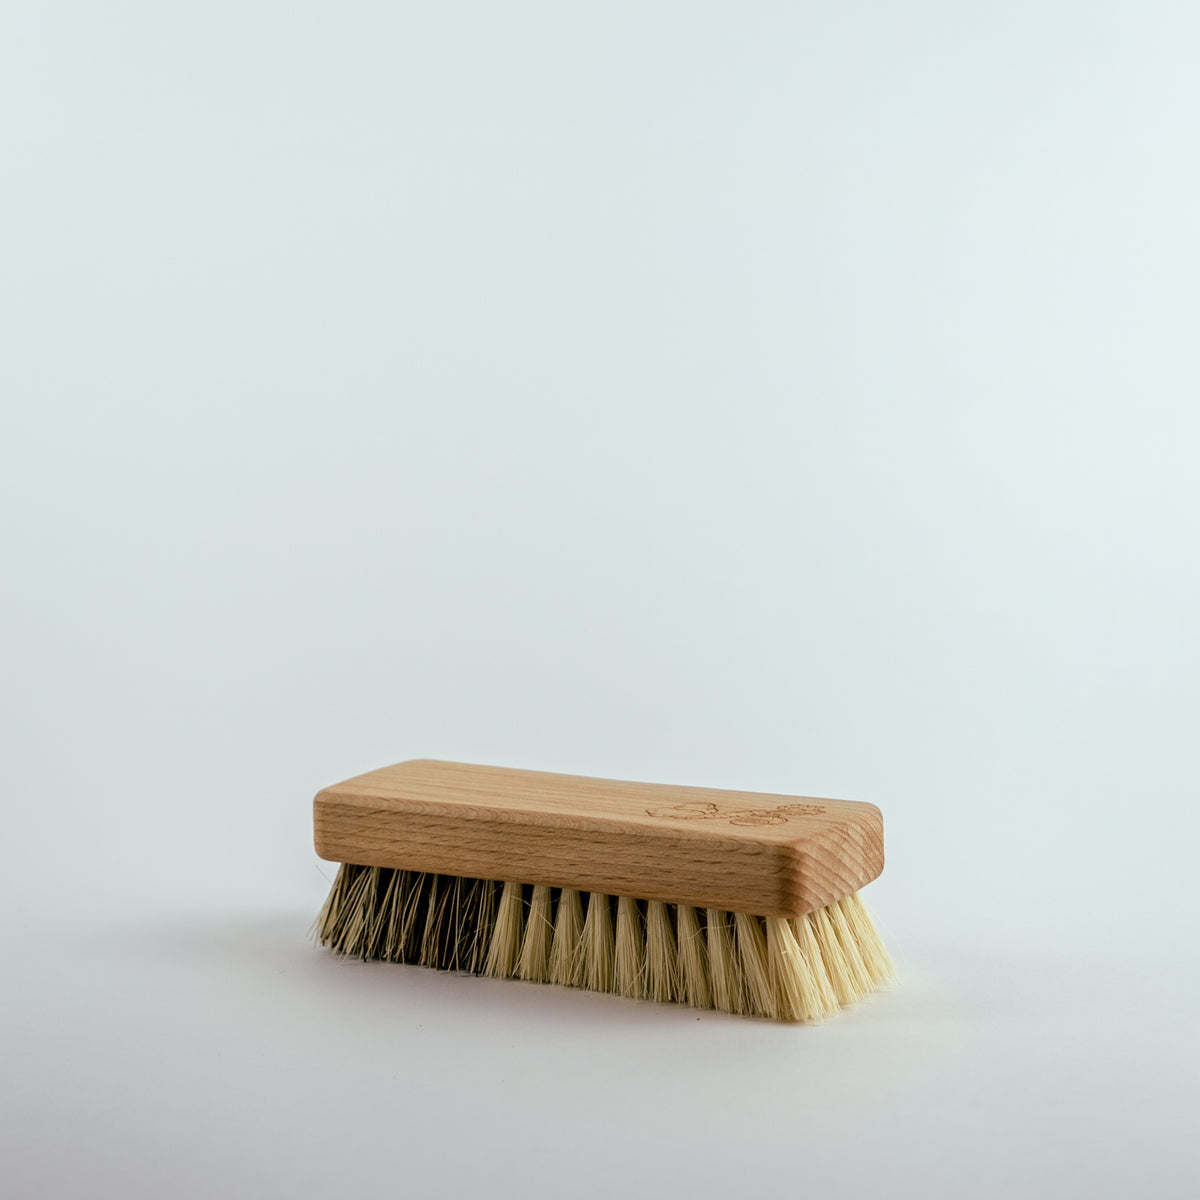 Package Free Sustainable Vegetable Brush, Size: One Size